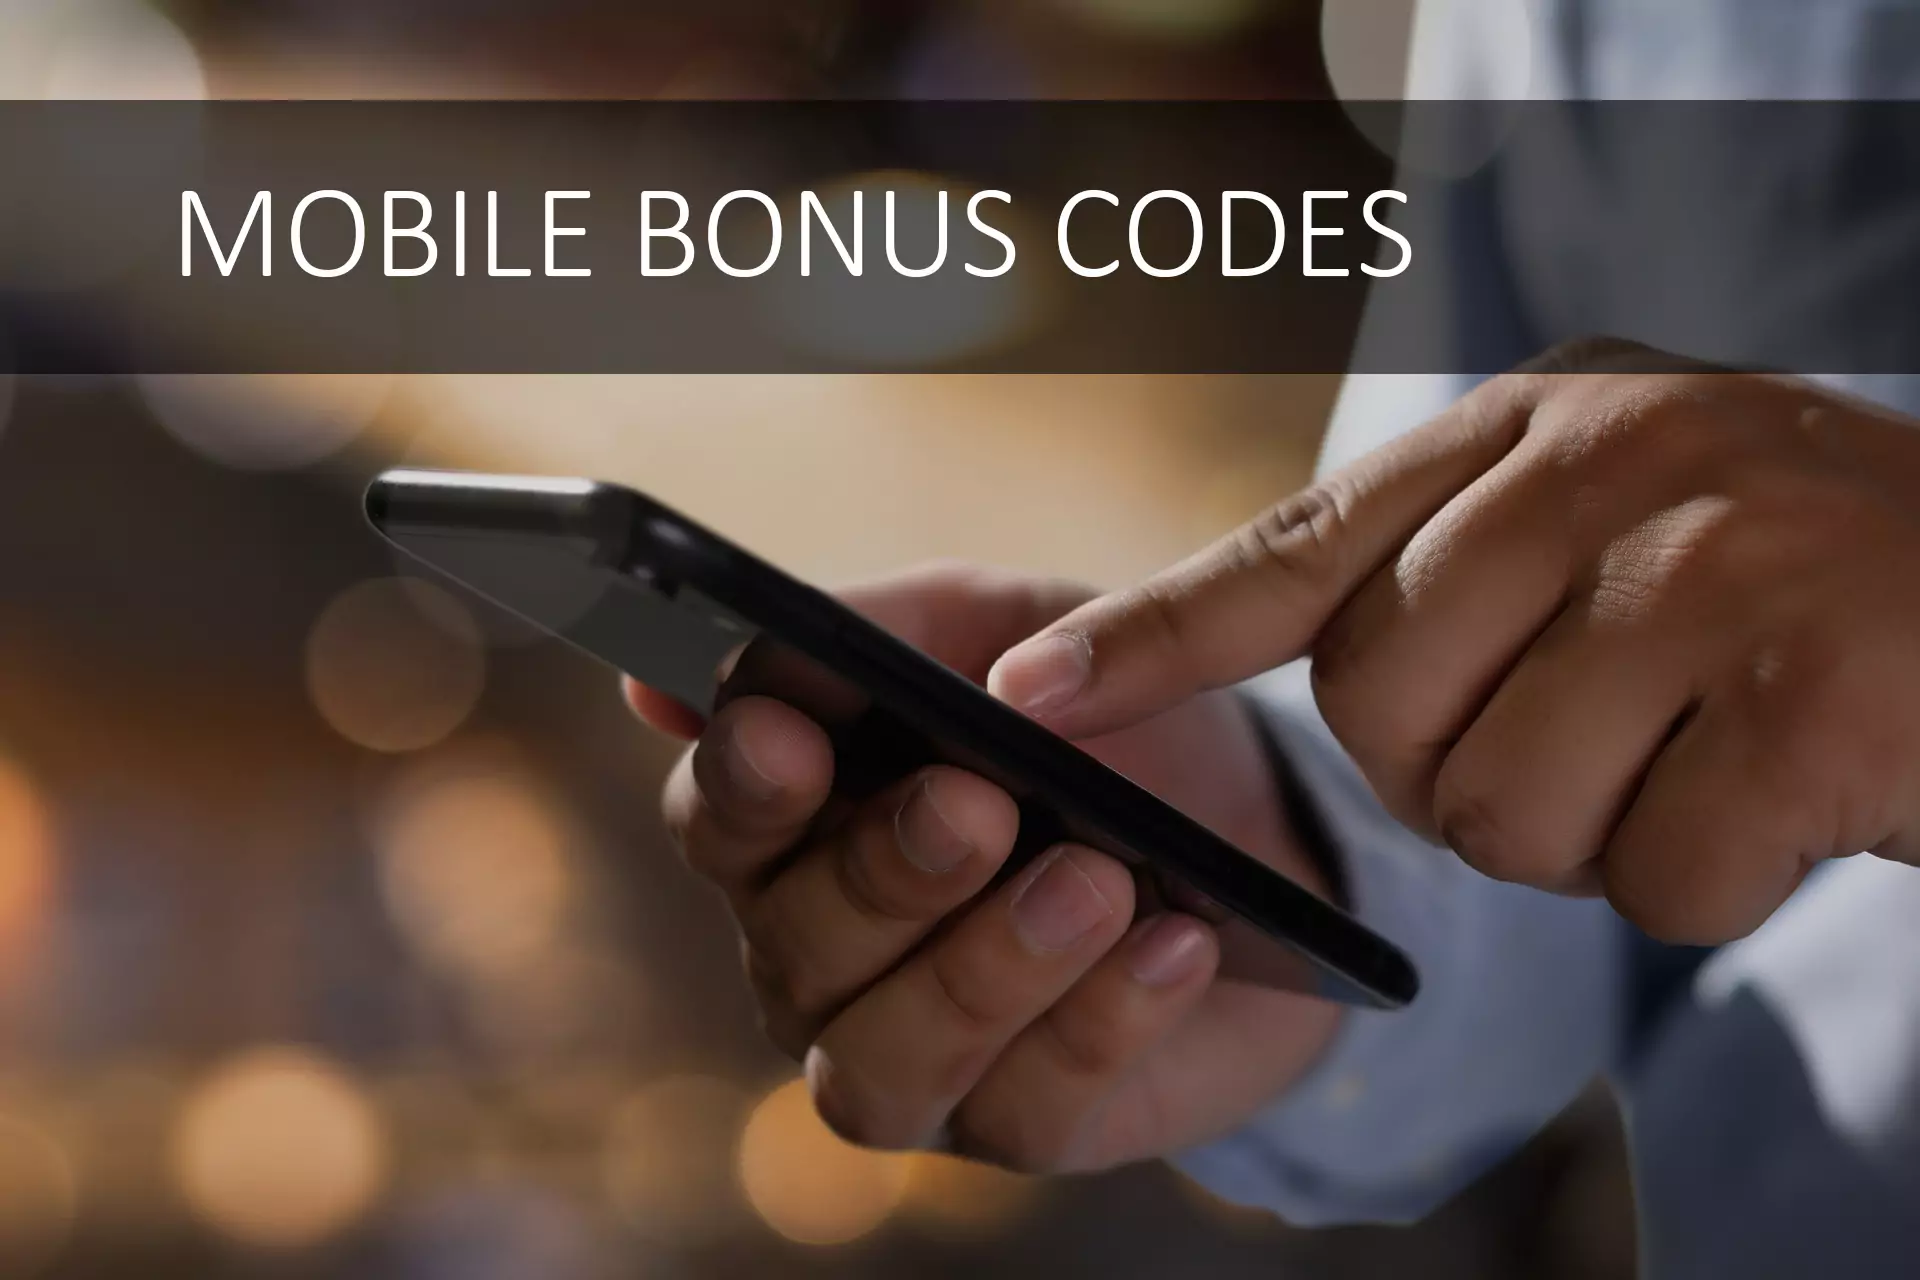 To receive a mobile bonus code you should download and install the app of this bookmaker.